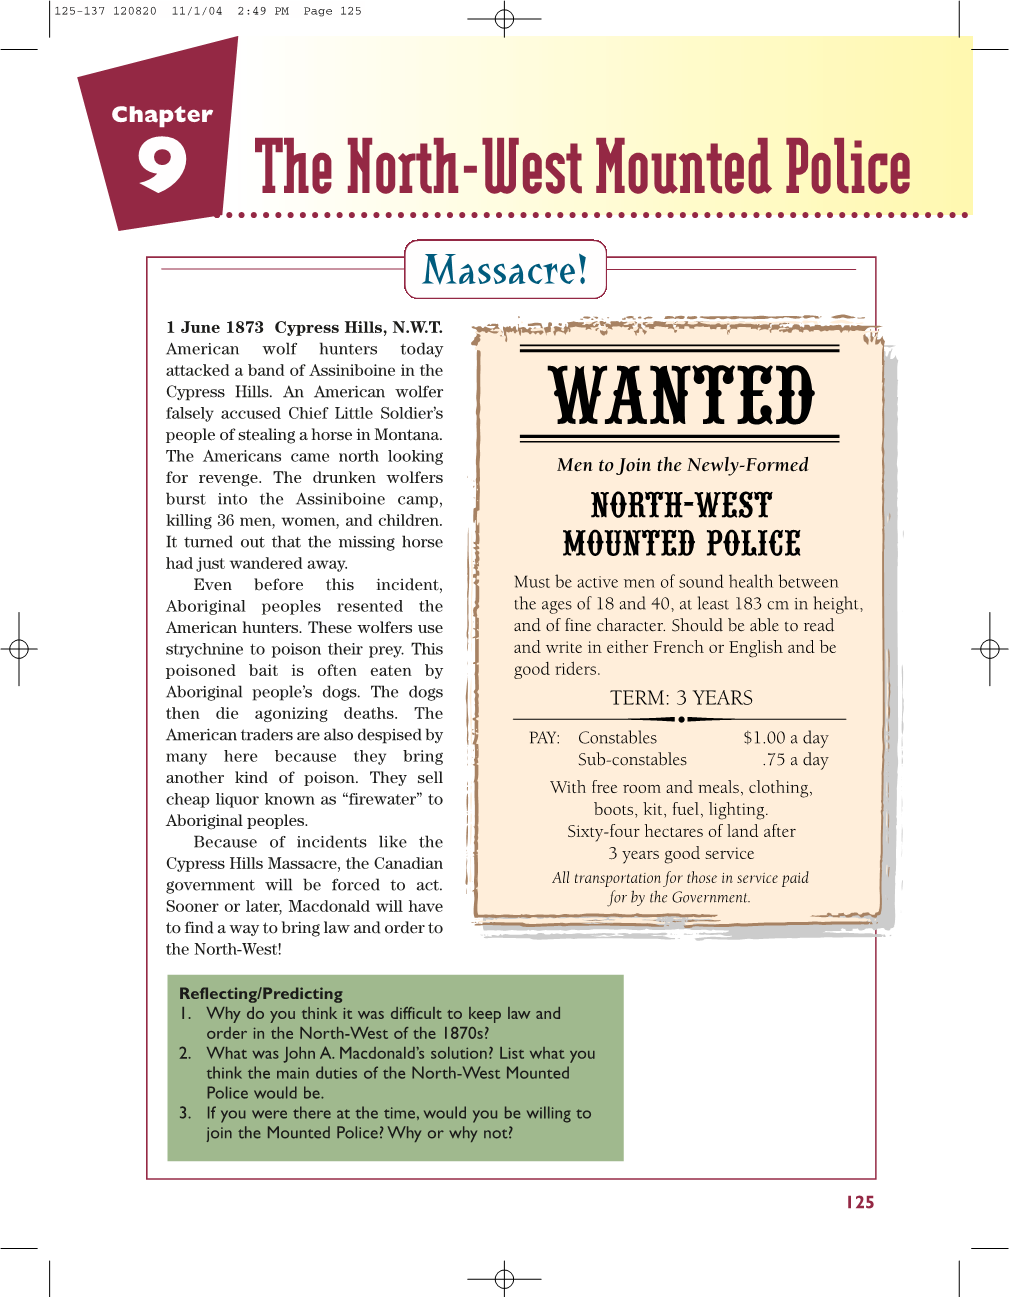 9 the North-West Mounted Police Massacre!